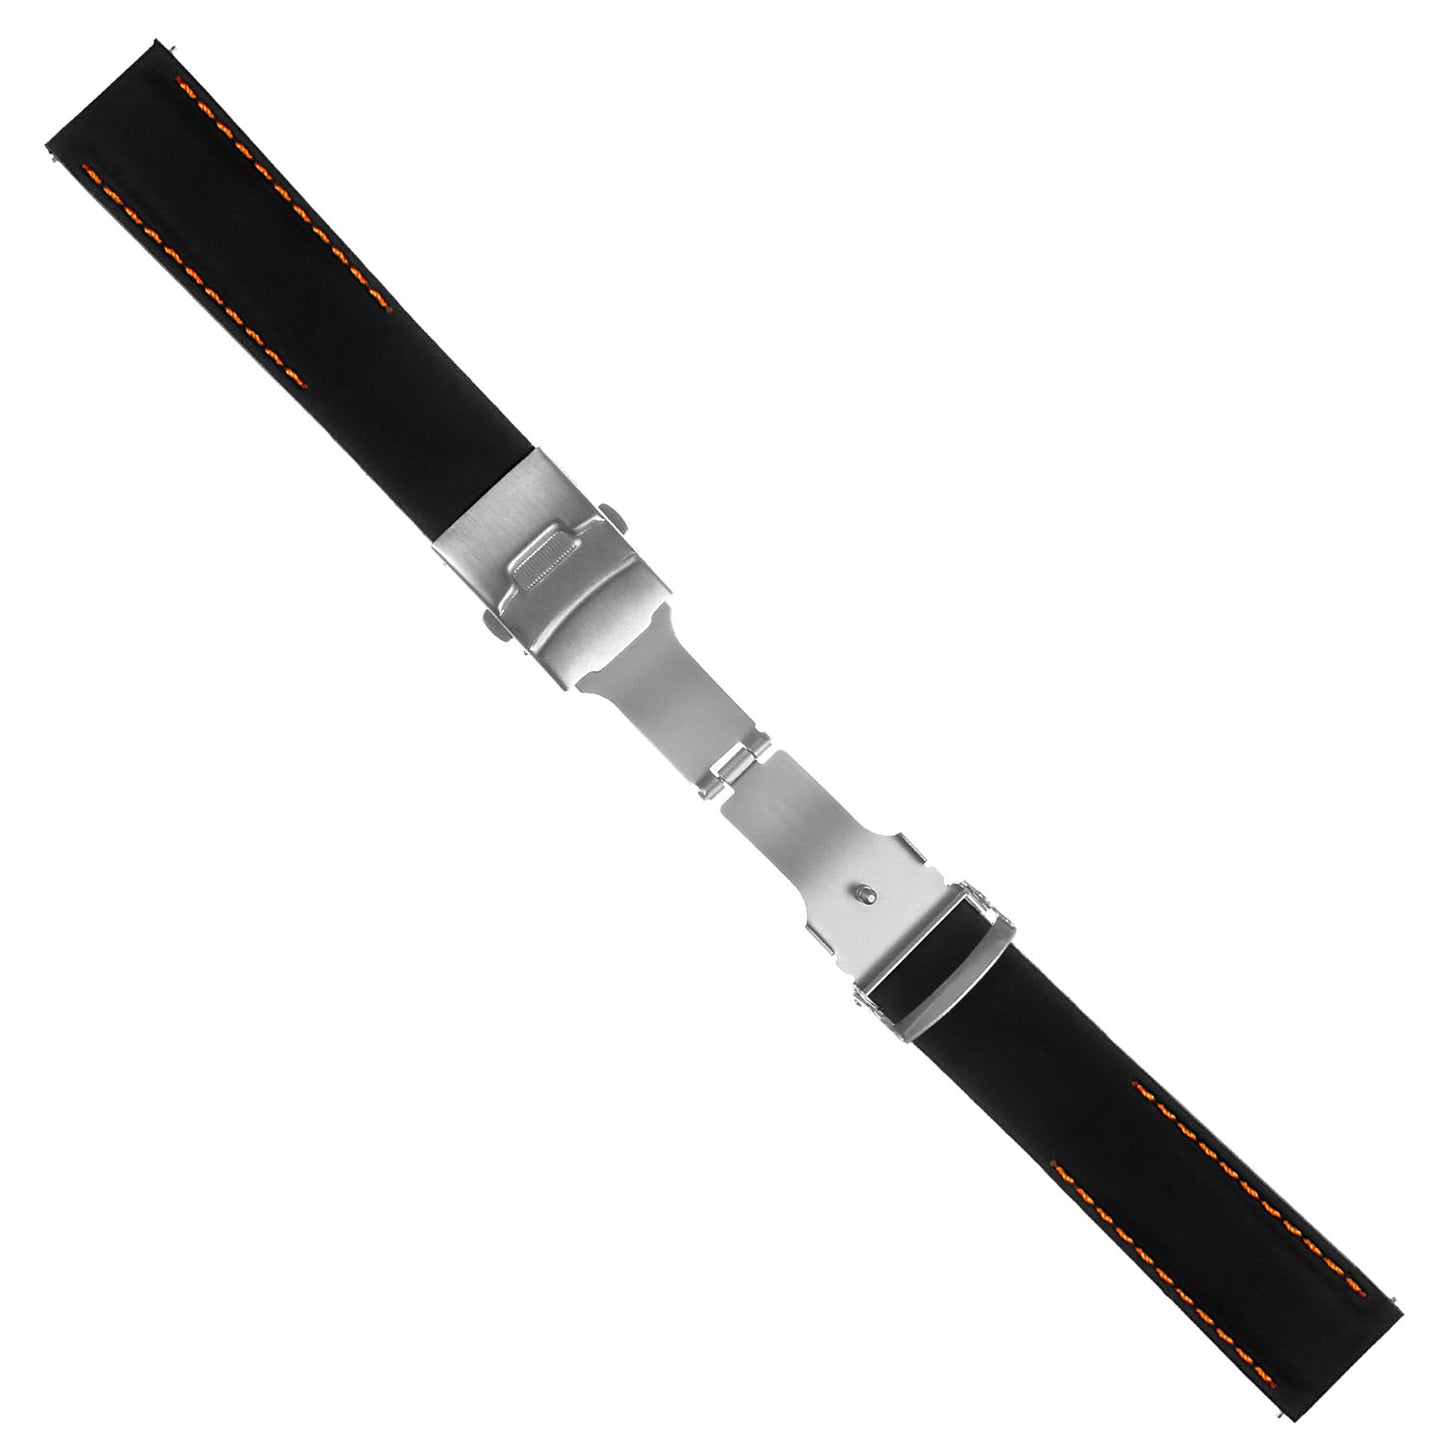 Silicone Rubber Strap with Stitching for Samsung Galaxy Watch Active